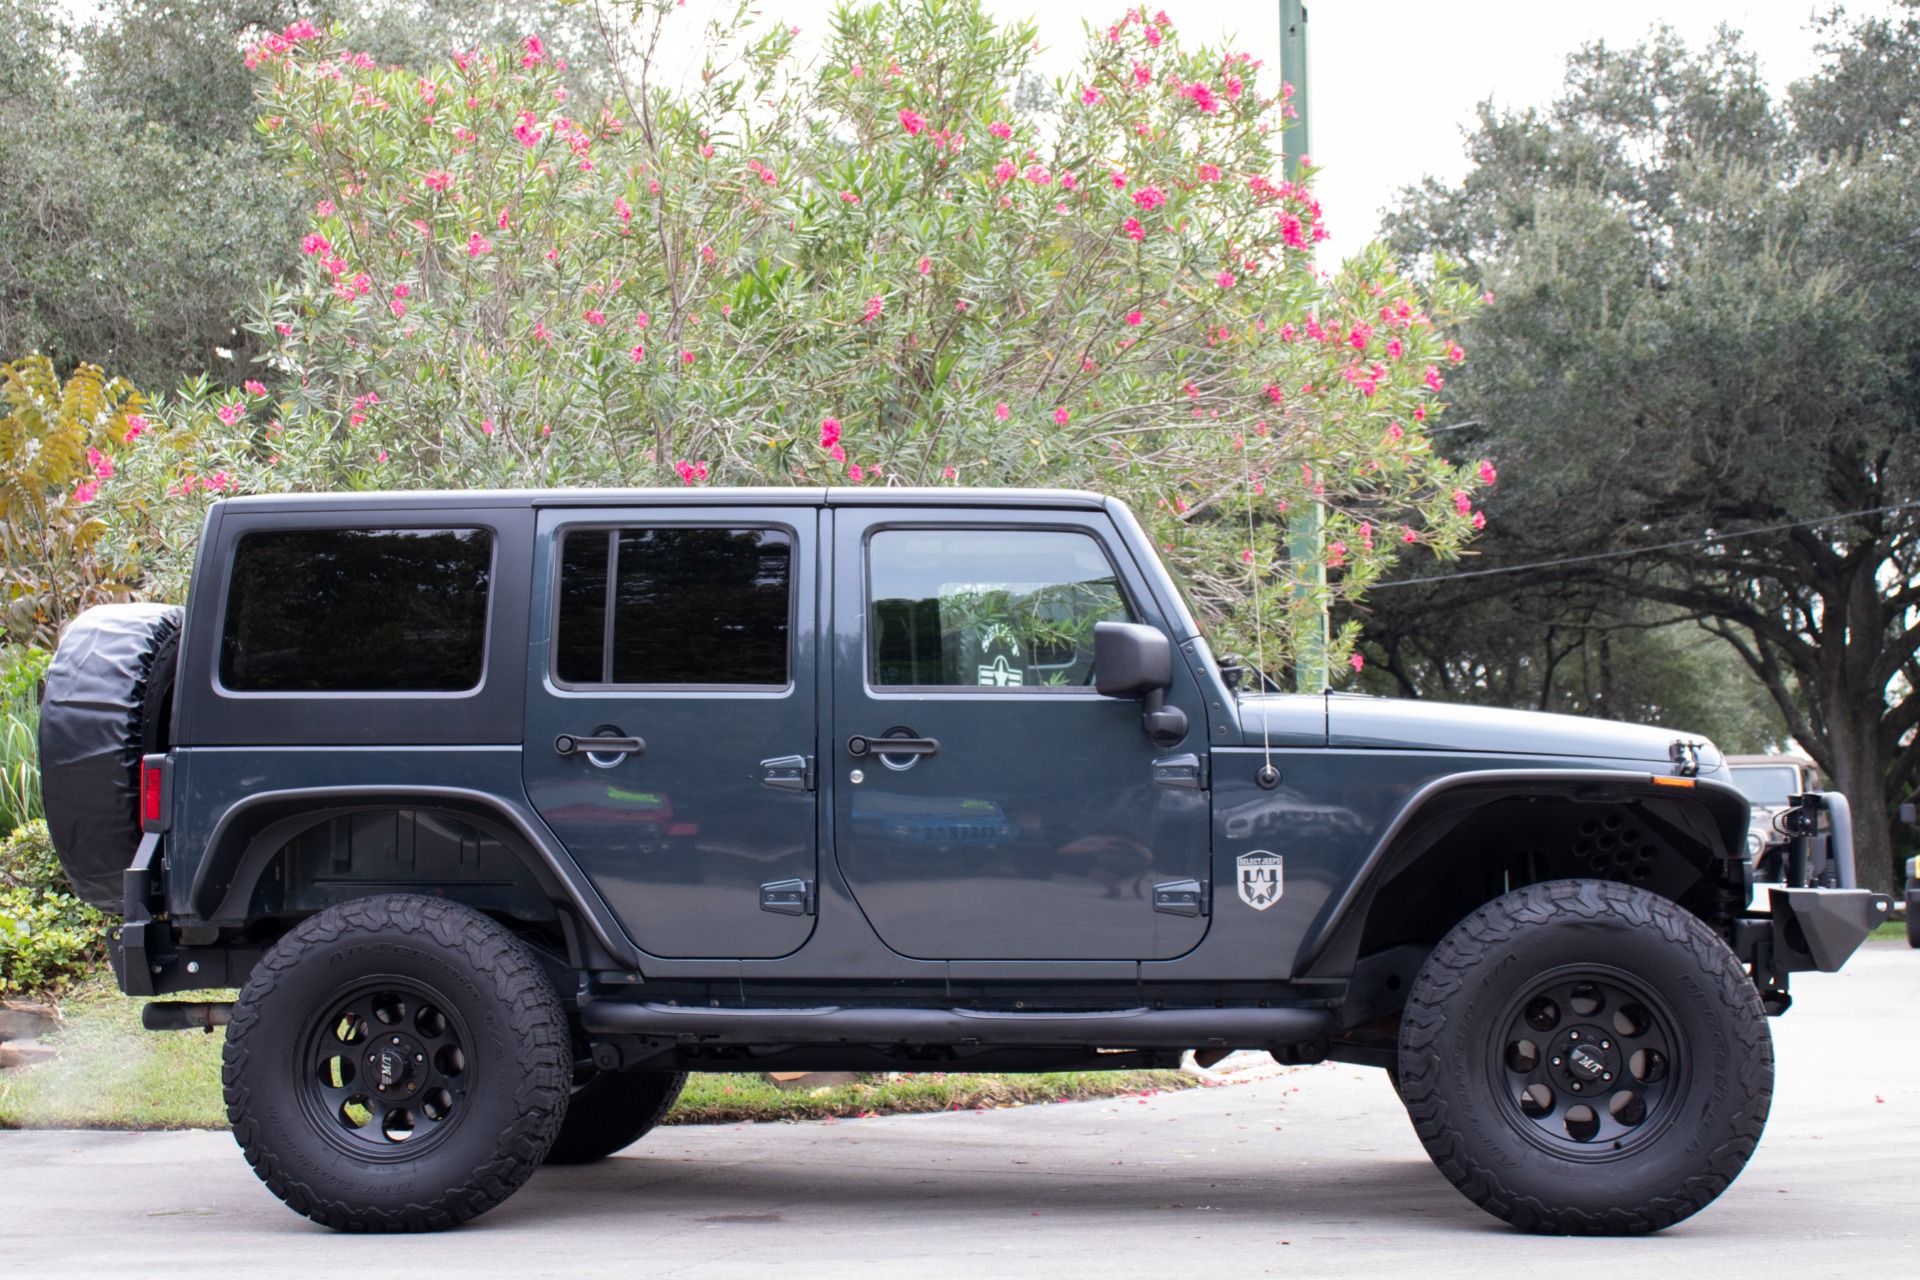 Used 2008 Jeep Wrangler Unlimited X For Sale ($18,995) | Select Jeeps Inc.  Stock #511154